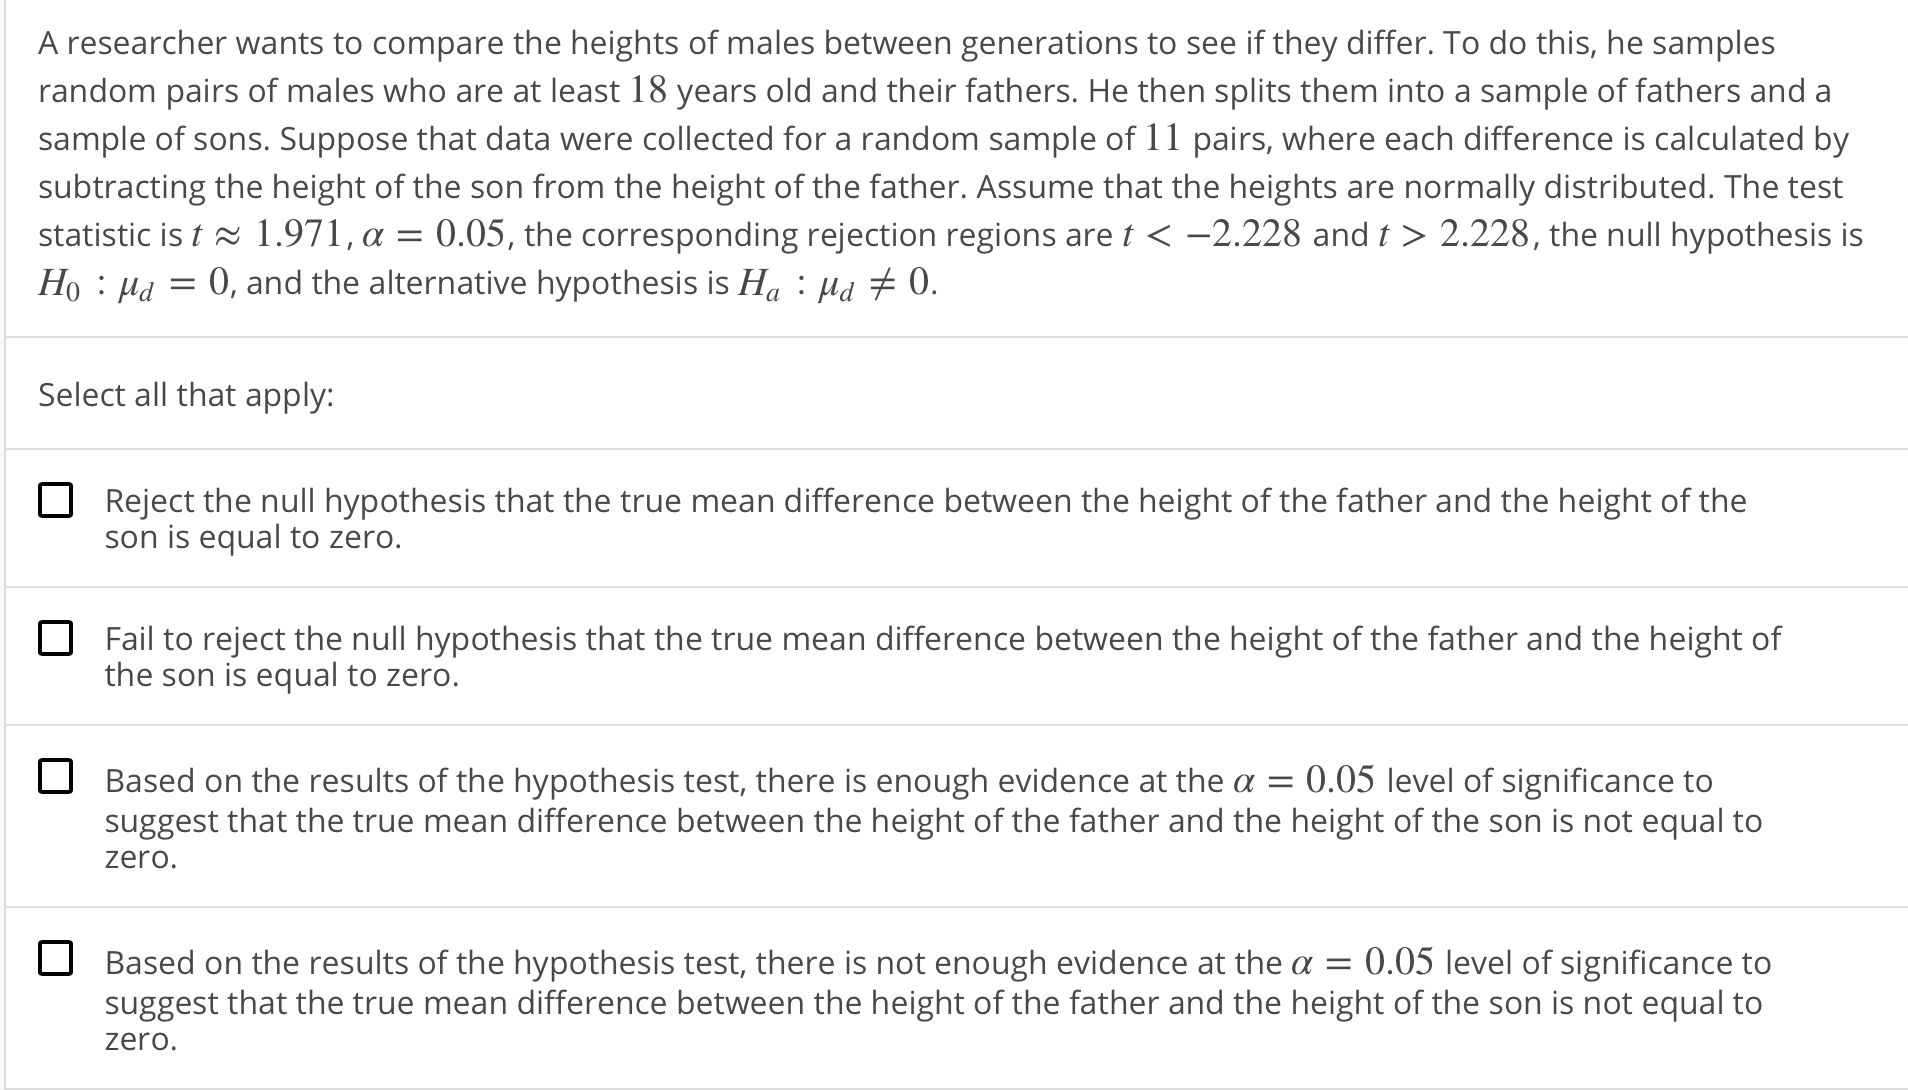 A researcher wants to compare the heights of males between generations to see if they differ. To do this, he samples
random pairs of males who are at least 18 years old and their fathers. He then splits them into a sample of fathers and a
sample of sons. Suppose that data were collected for a random sample of 11 pairs, where each difference is calculated by
subtracting the height of the son from the height of the father. Assume that the heights are normally distributed. The test
statistic is t ~ 1 .971 , α-005, the corresponding rejection regions are t <-2228 and 〉 2.228, the null hypothesis is
Ho Ha0, and the alternative hypothesis is Ha Hd 0.
Select all that apply:
Reject the null hypothesis that the true mean difference between the height of the father and the height of the
son is equal to zero.
Fail to reject the null hypothesis that the true mean difference between the height of the father and the height of
the son is equal to zero.
Based on the results of the hypothesis test, there is enough evidence at the-0.05 level of significance to
suggest that the true mean difference between the height of the father and the height of the son is not equal to
zero.
Based on the results of the hypothesis test, there is not enough evidence at the 0.05 level of significance to
suggest that the true mean difference between the height of the father and the height of the son is not equal to
zero.
